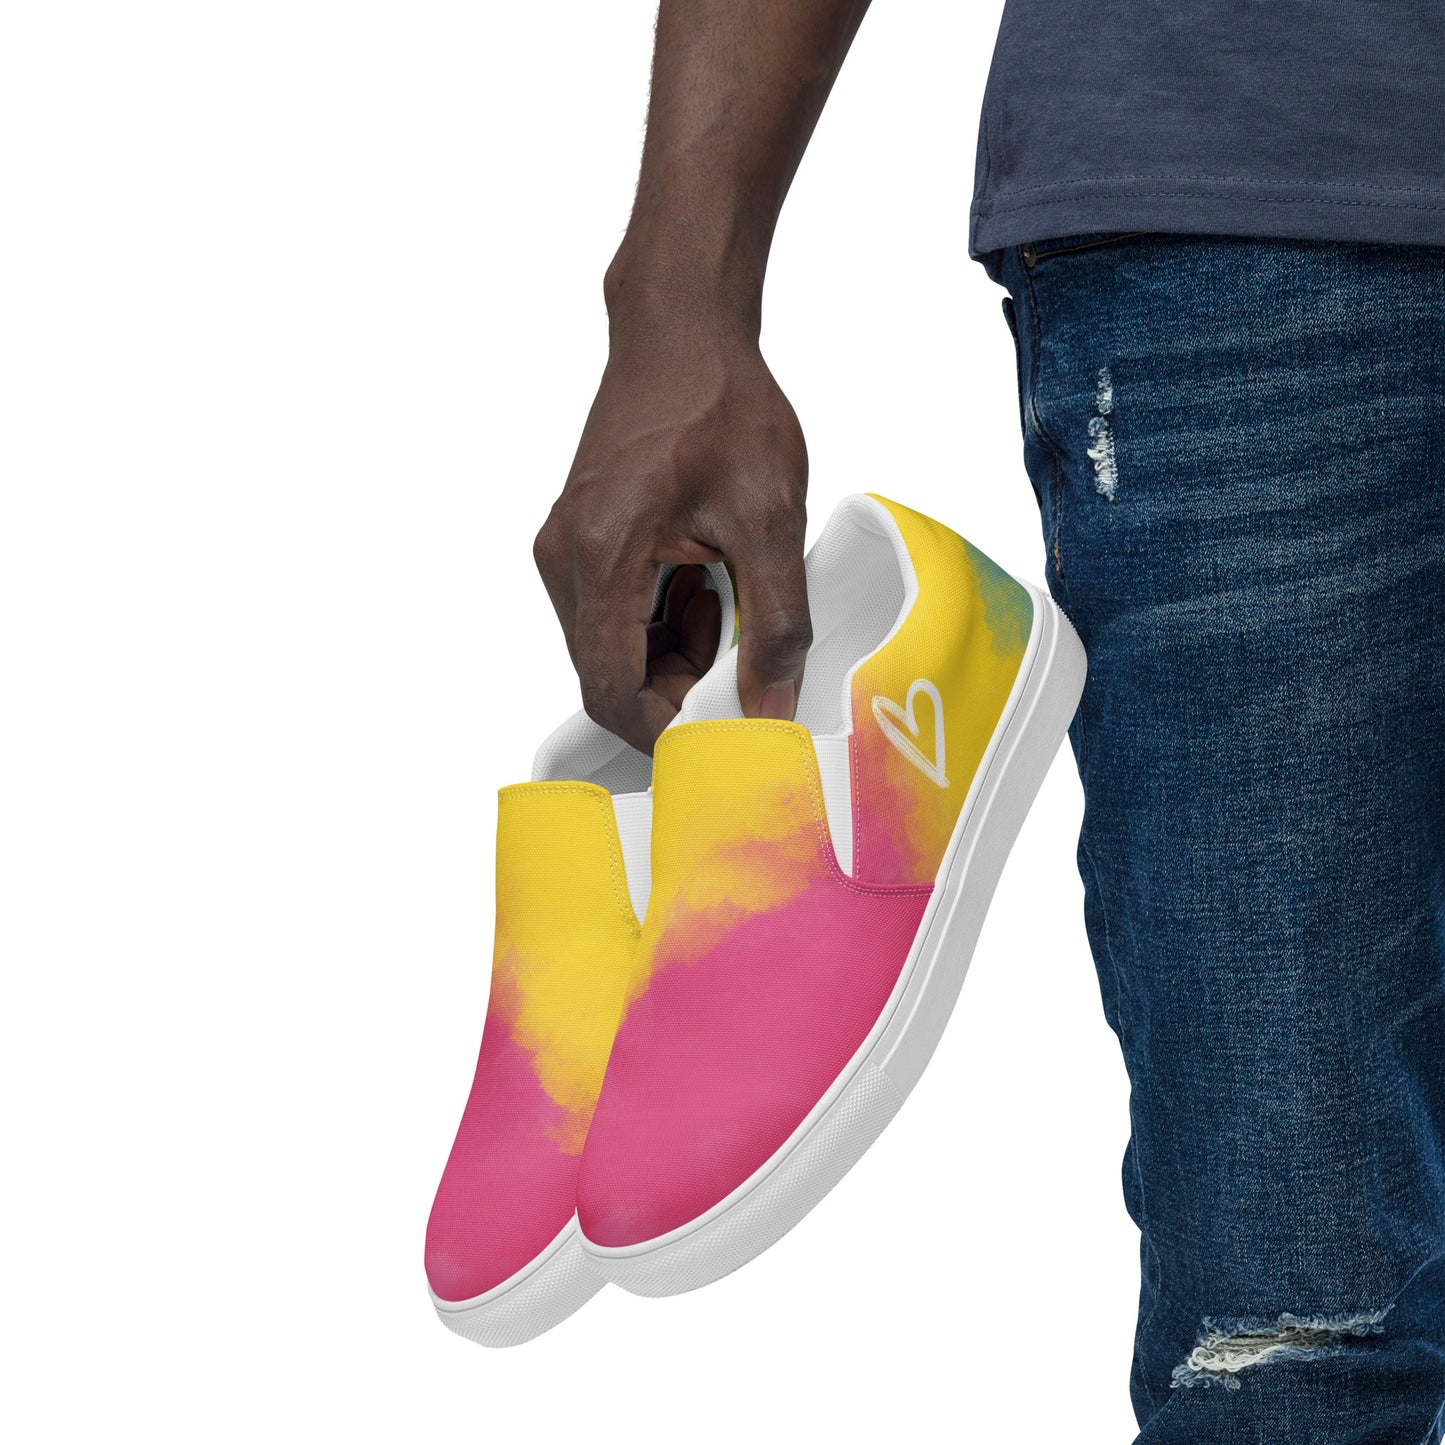 A model holds a pair of slip on shoes with color block pink, yellow, and blue clouds, a white hand drawn heart, and the Aras Sivad logo on the back.